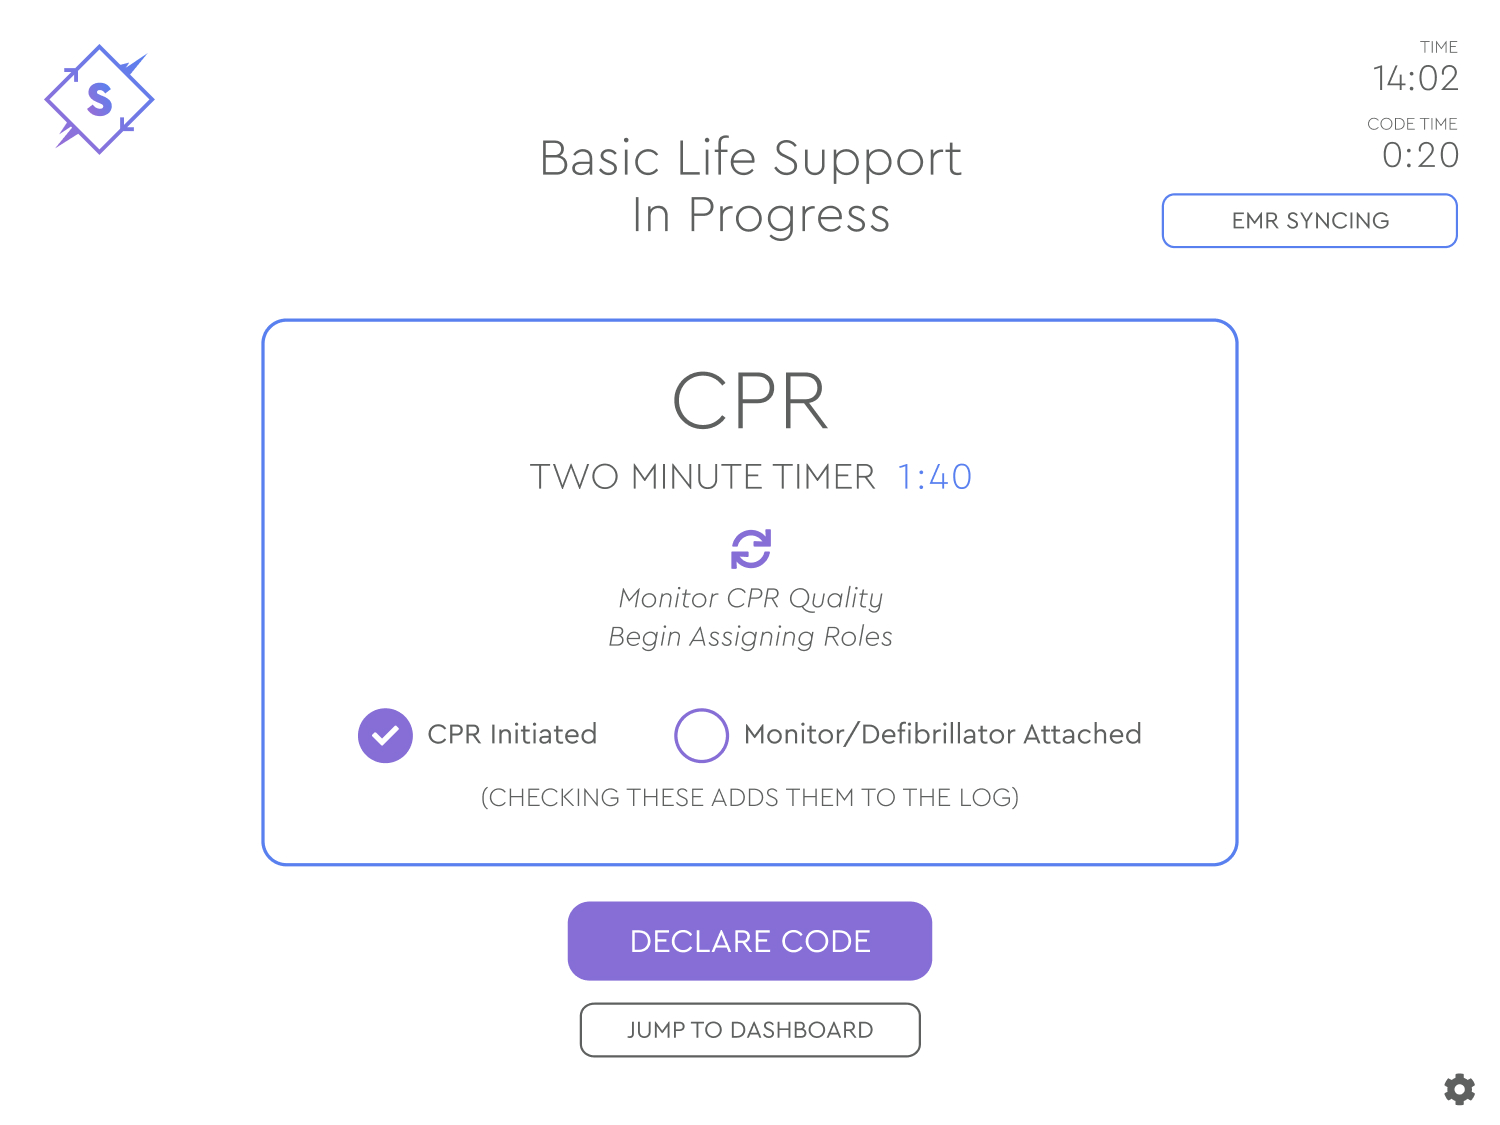 Project image for Synchronize, CPR Progress Screen on iPad Pro, CPR Initiated.